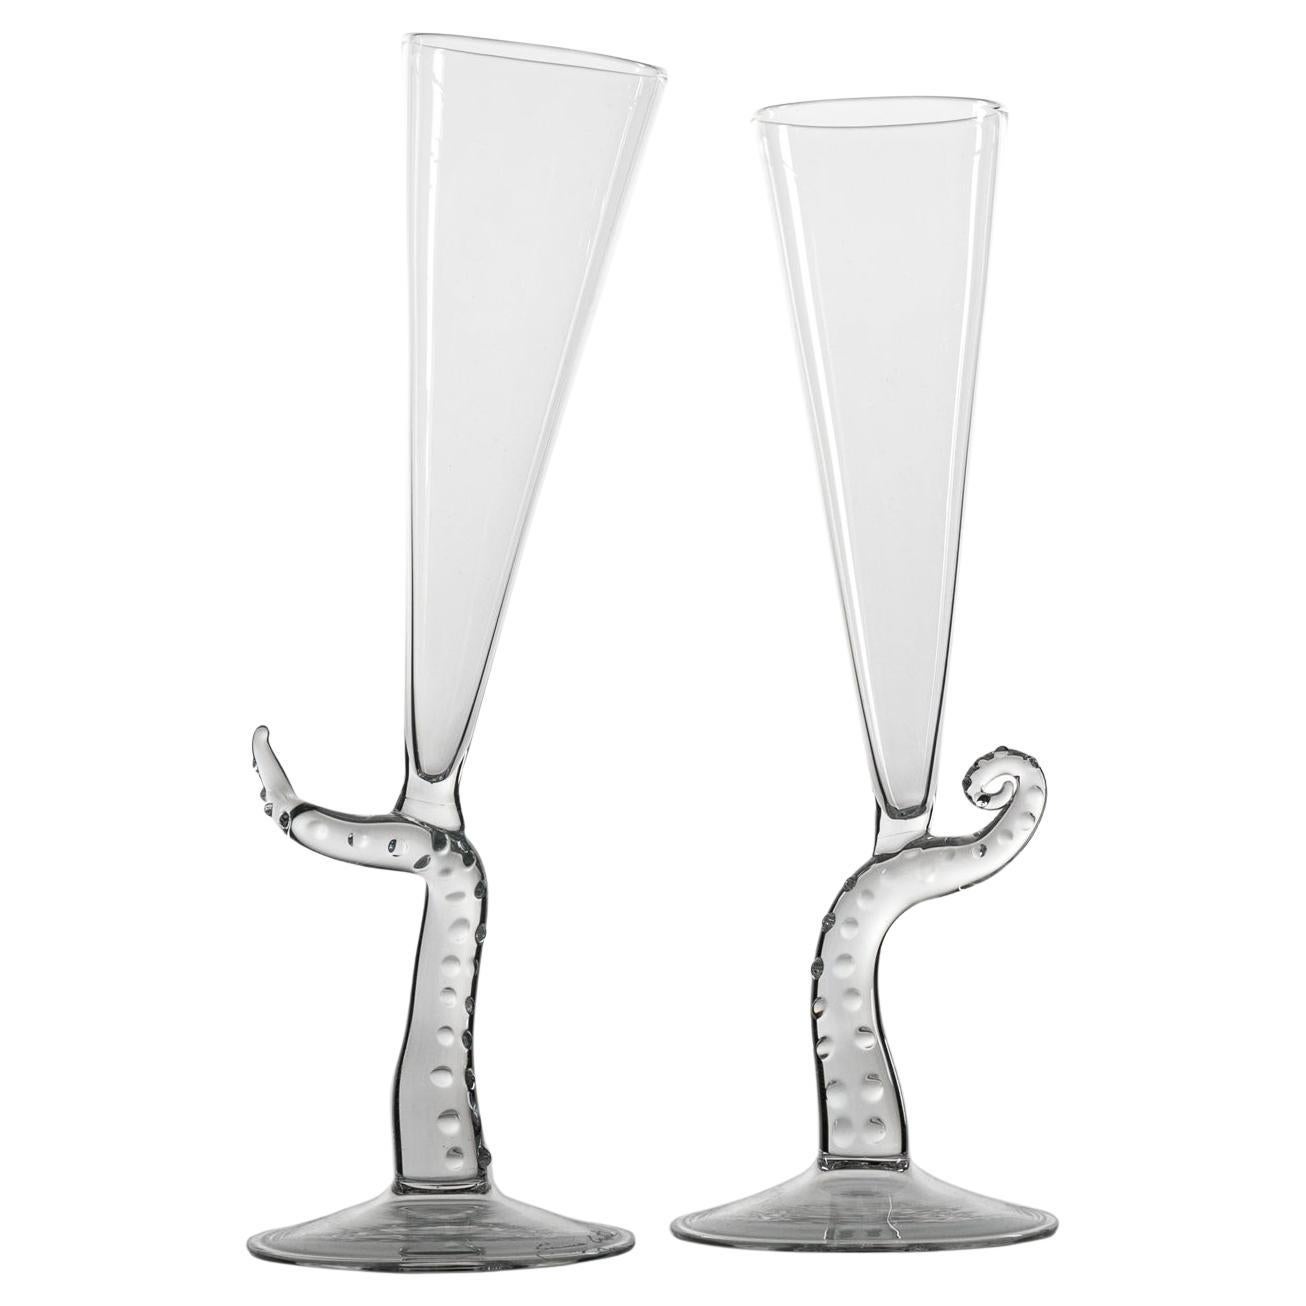 "A Pair of Tentacle Flutes" Hand Blown Glasses by Simone Crestani